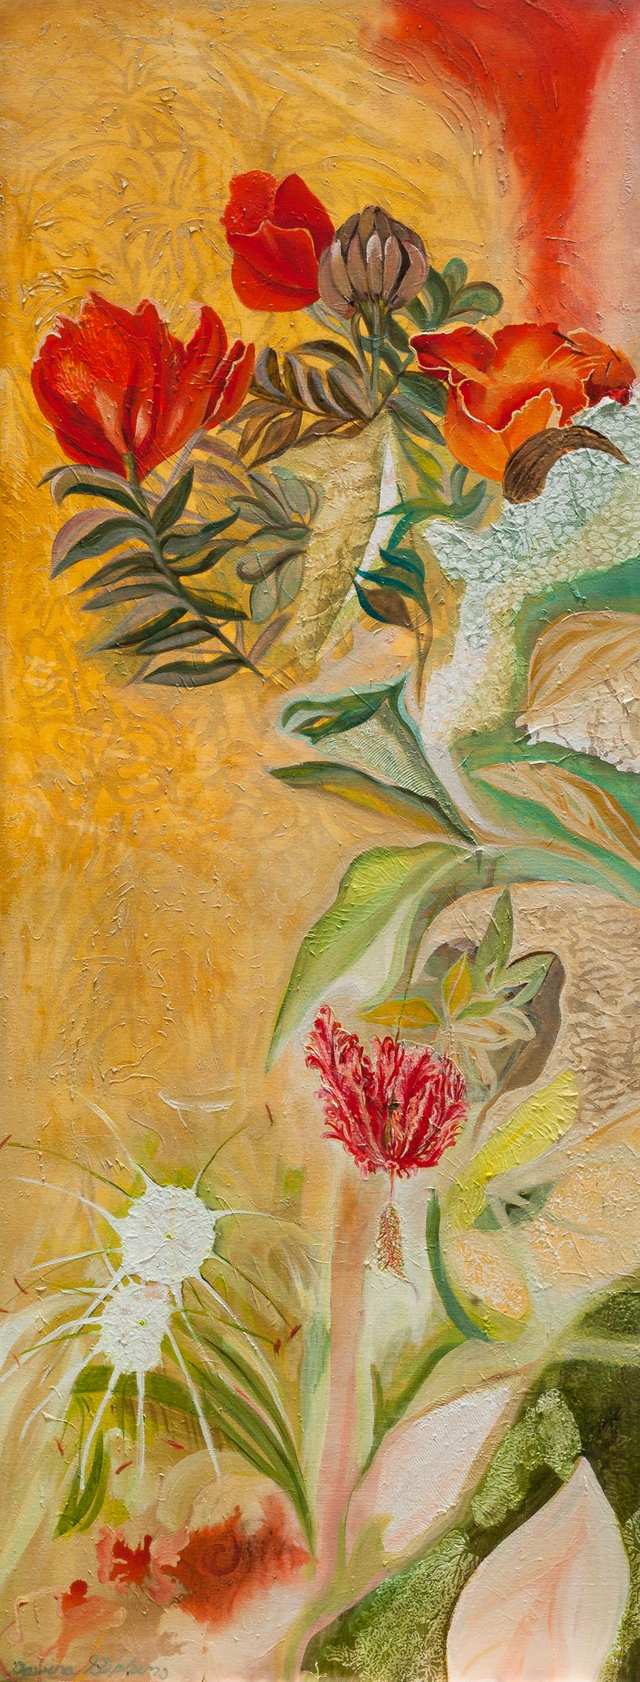 Nandi Flame, Beach Spider Lily And Hibiscus Flowers, woodblock acrylic on canvas